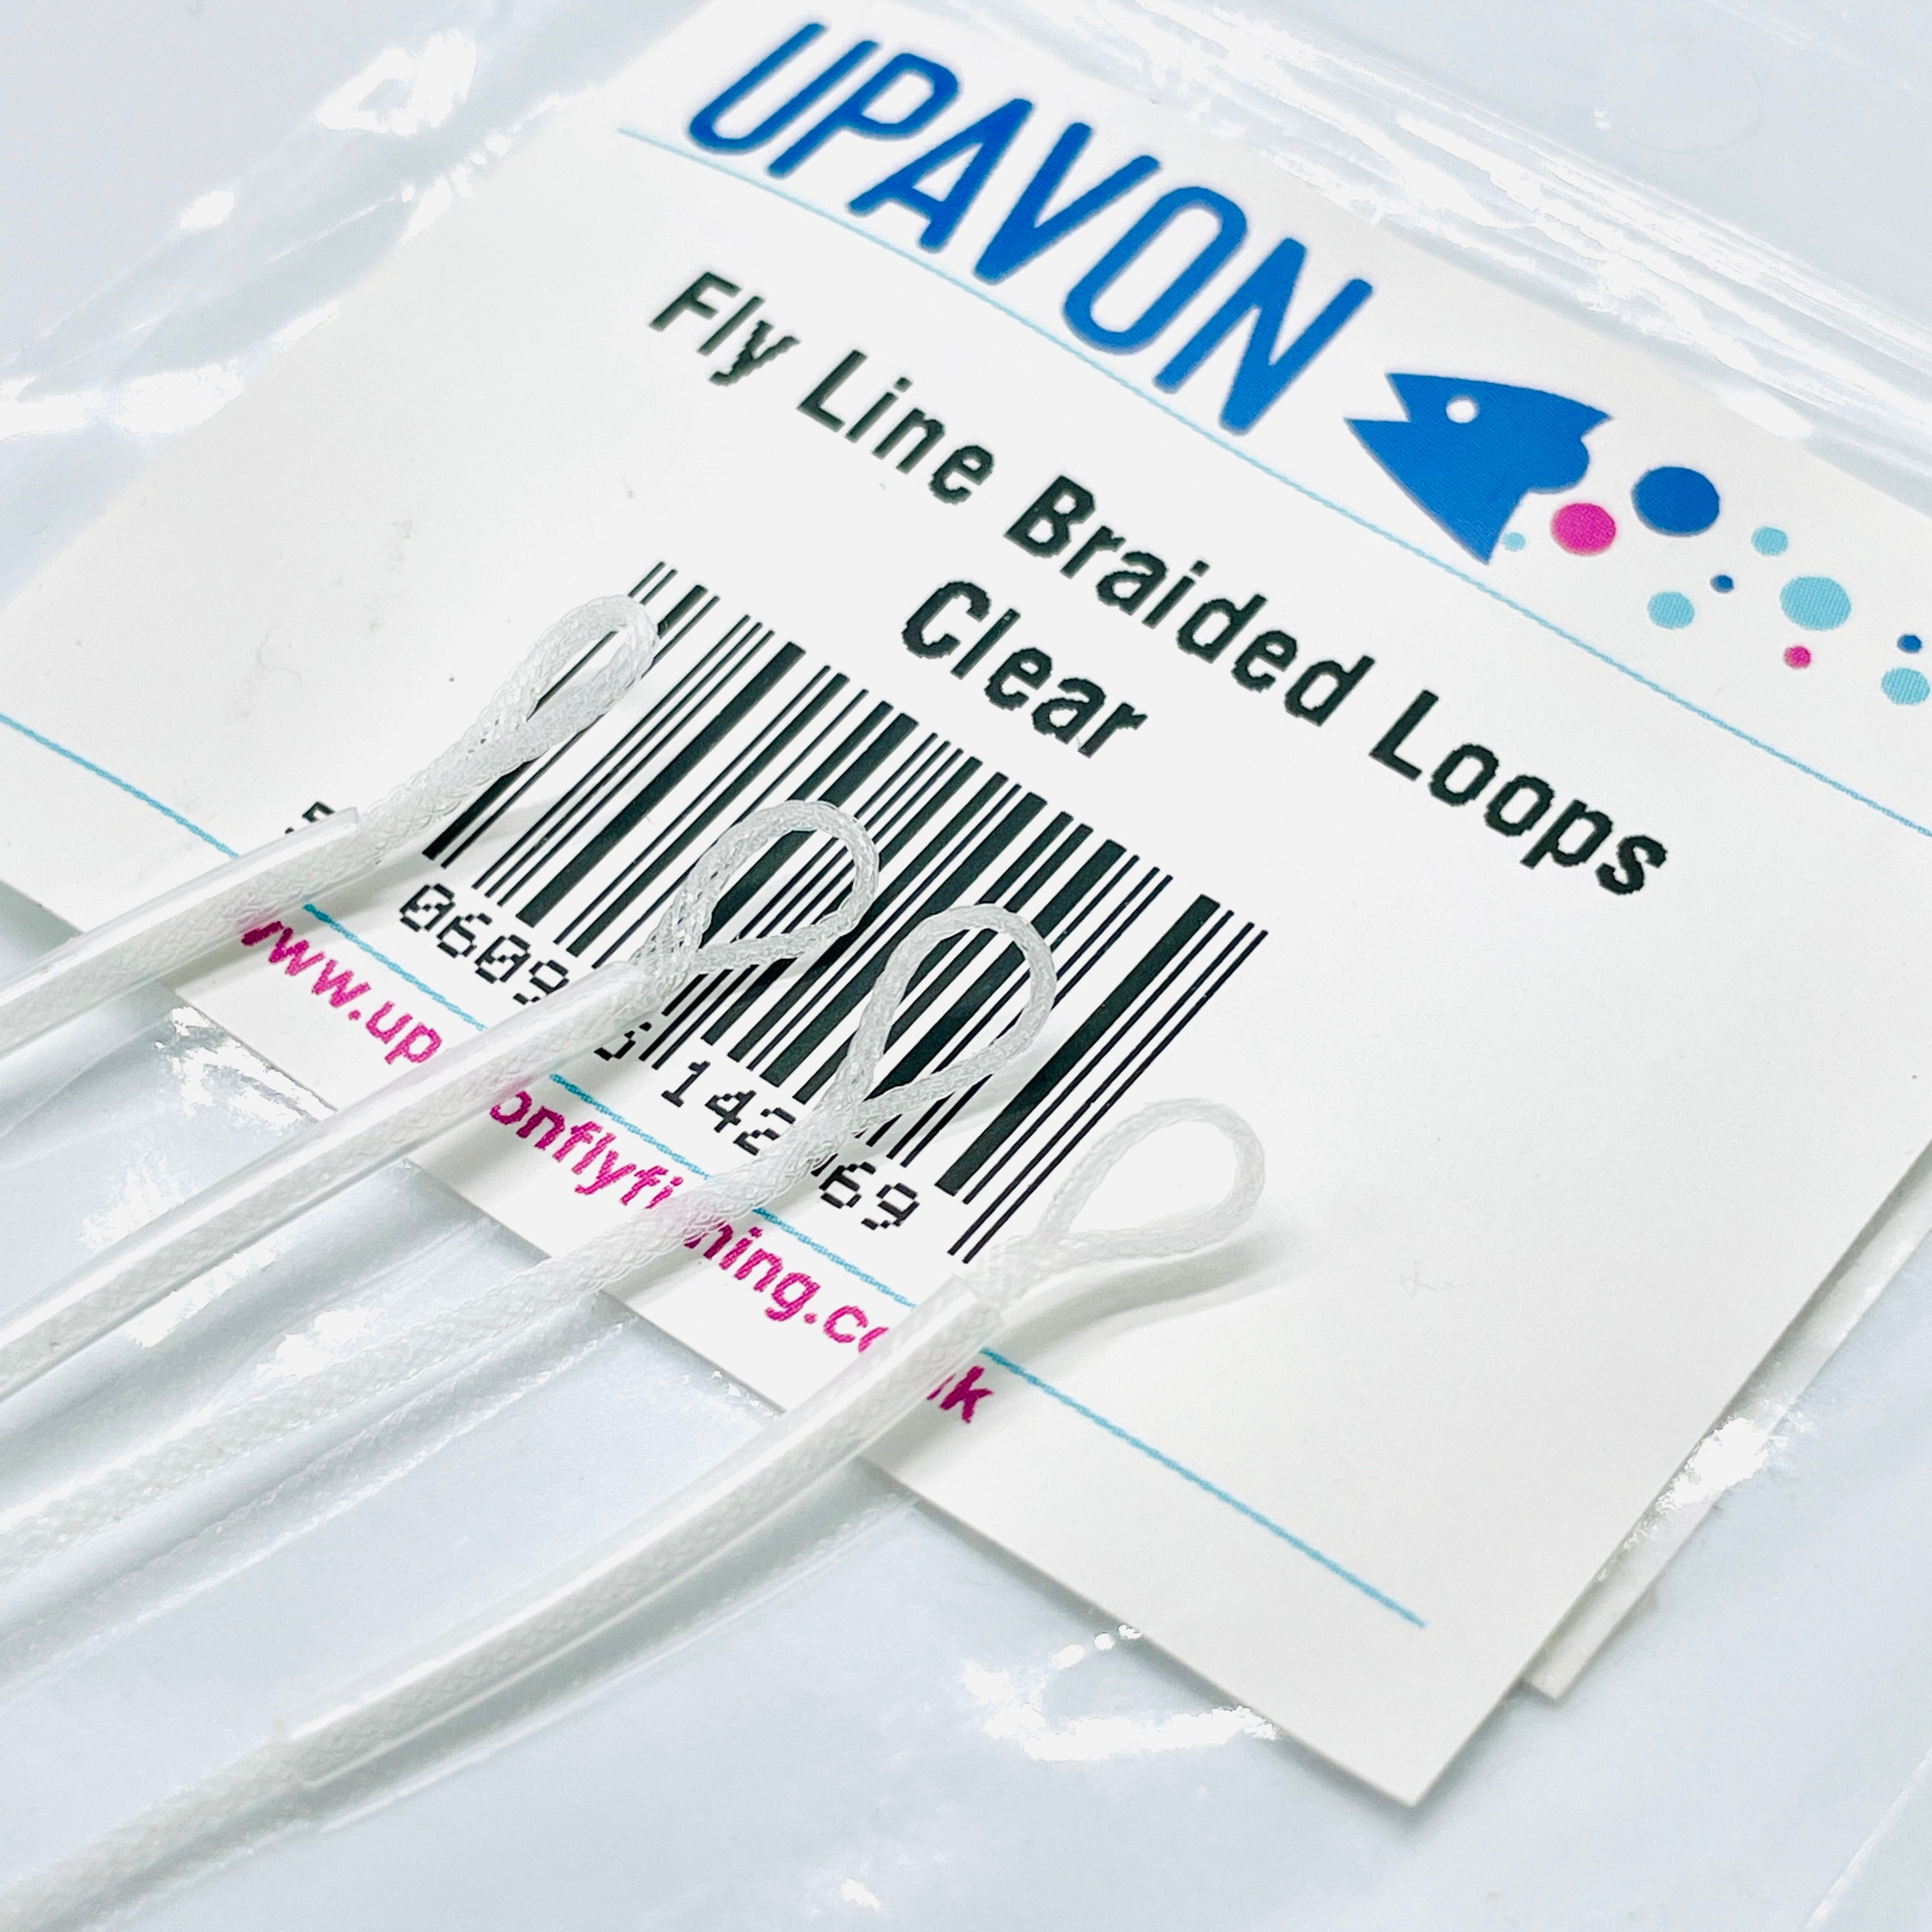 Upavon Clear Shrink Tube Fly Line Braided Loops - Upavon Fly Fishing